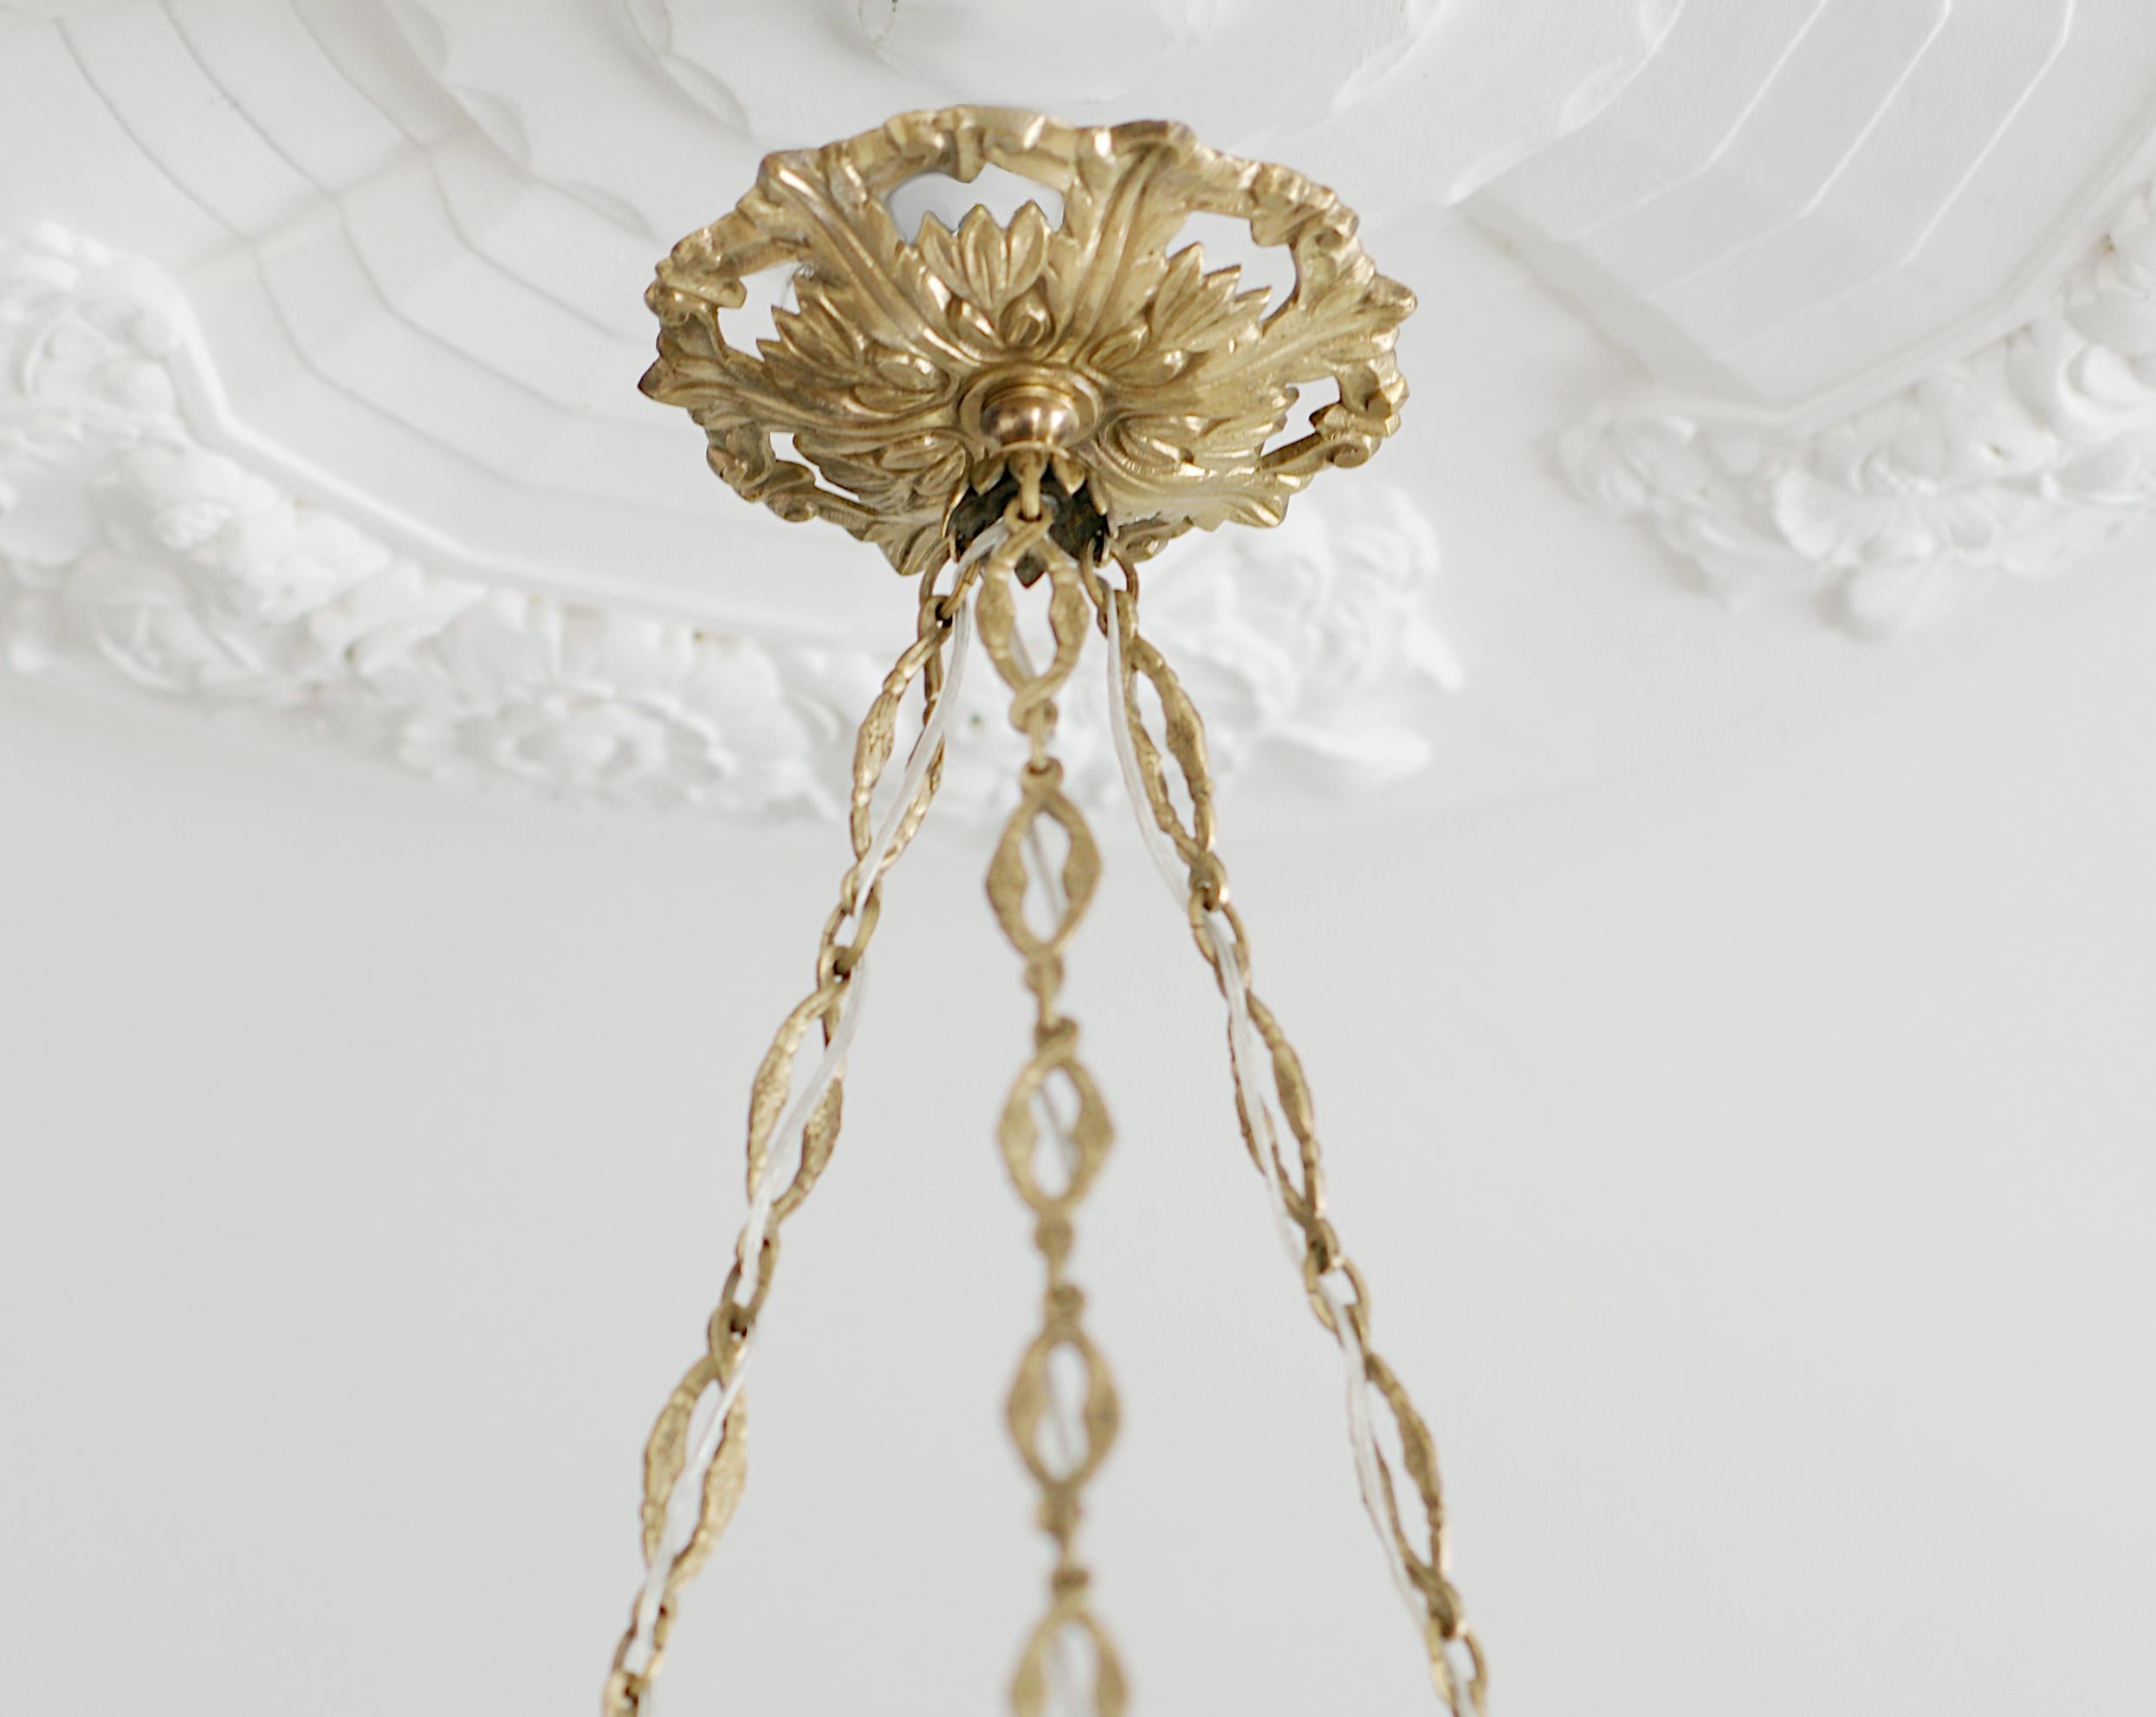 Daum Pierre D'Avesn Large French Art Deco Pendant Chandelier, Early 1930s For Sale 6